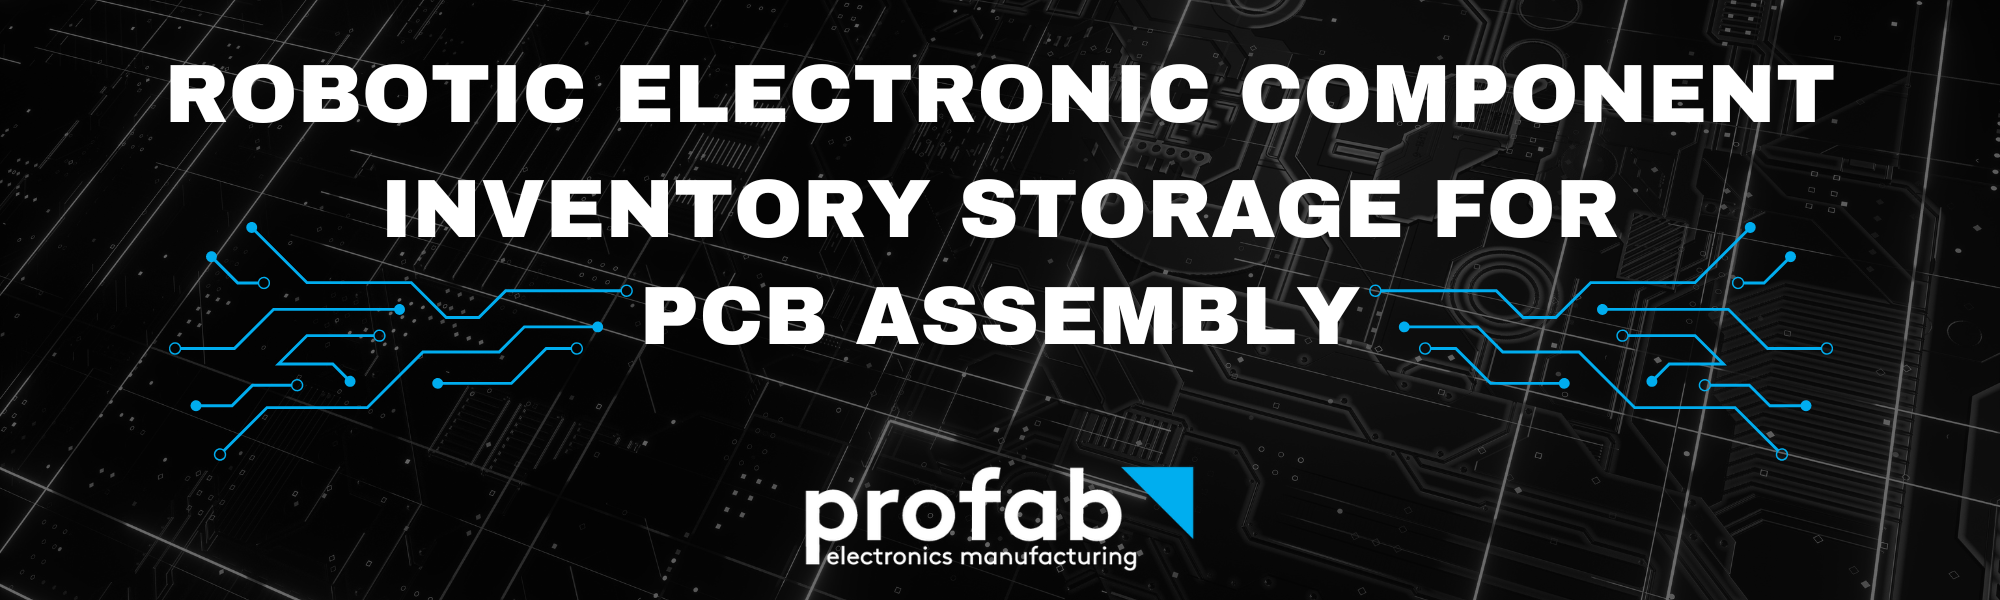 Robotic Electronic Component Inventory Storage